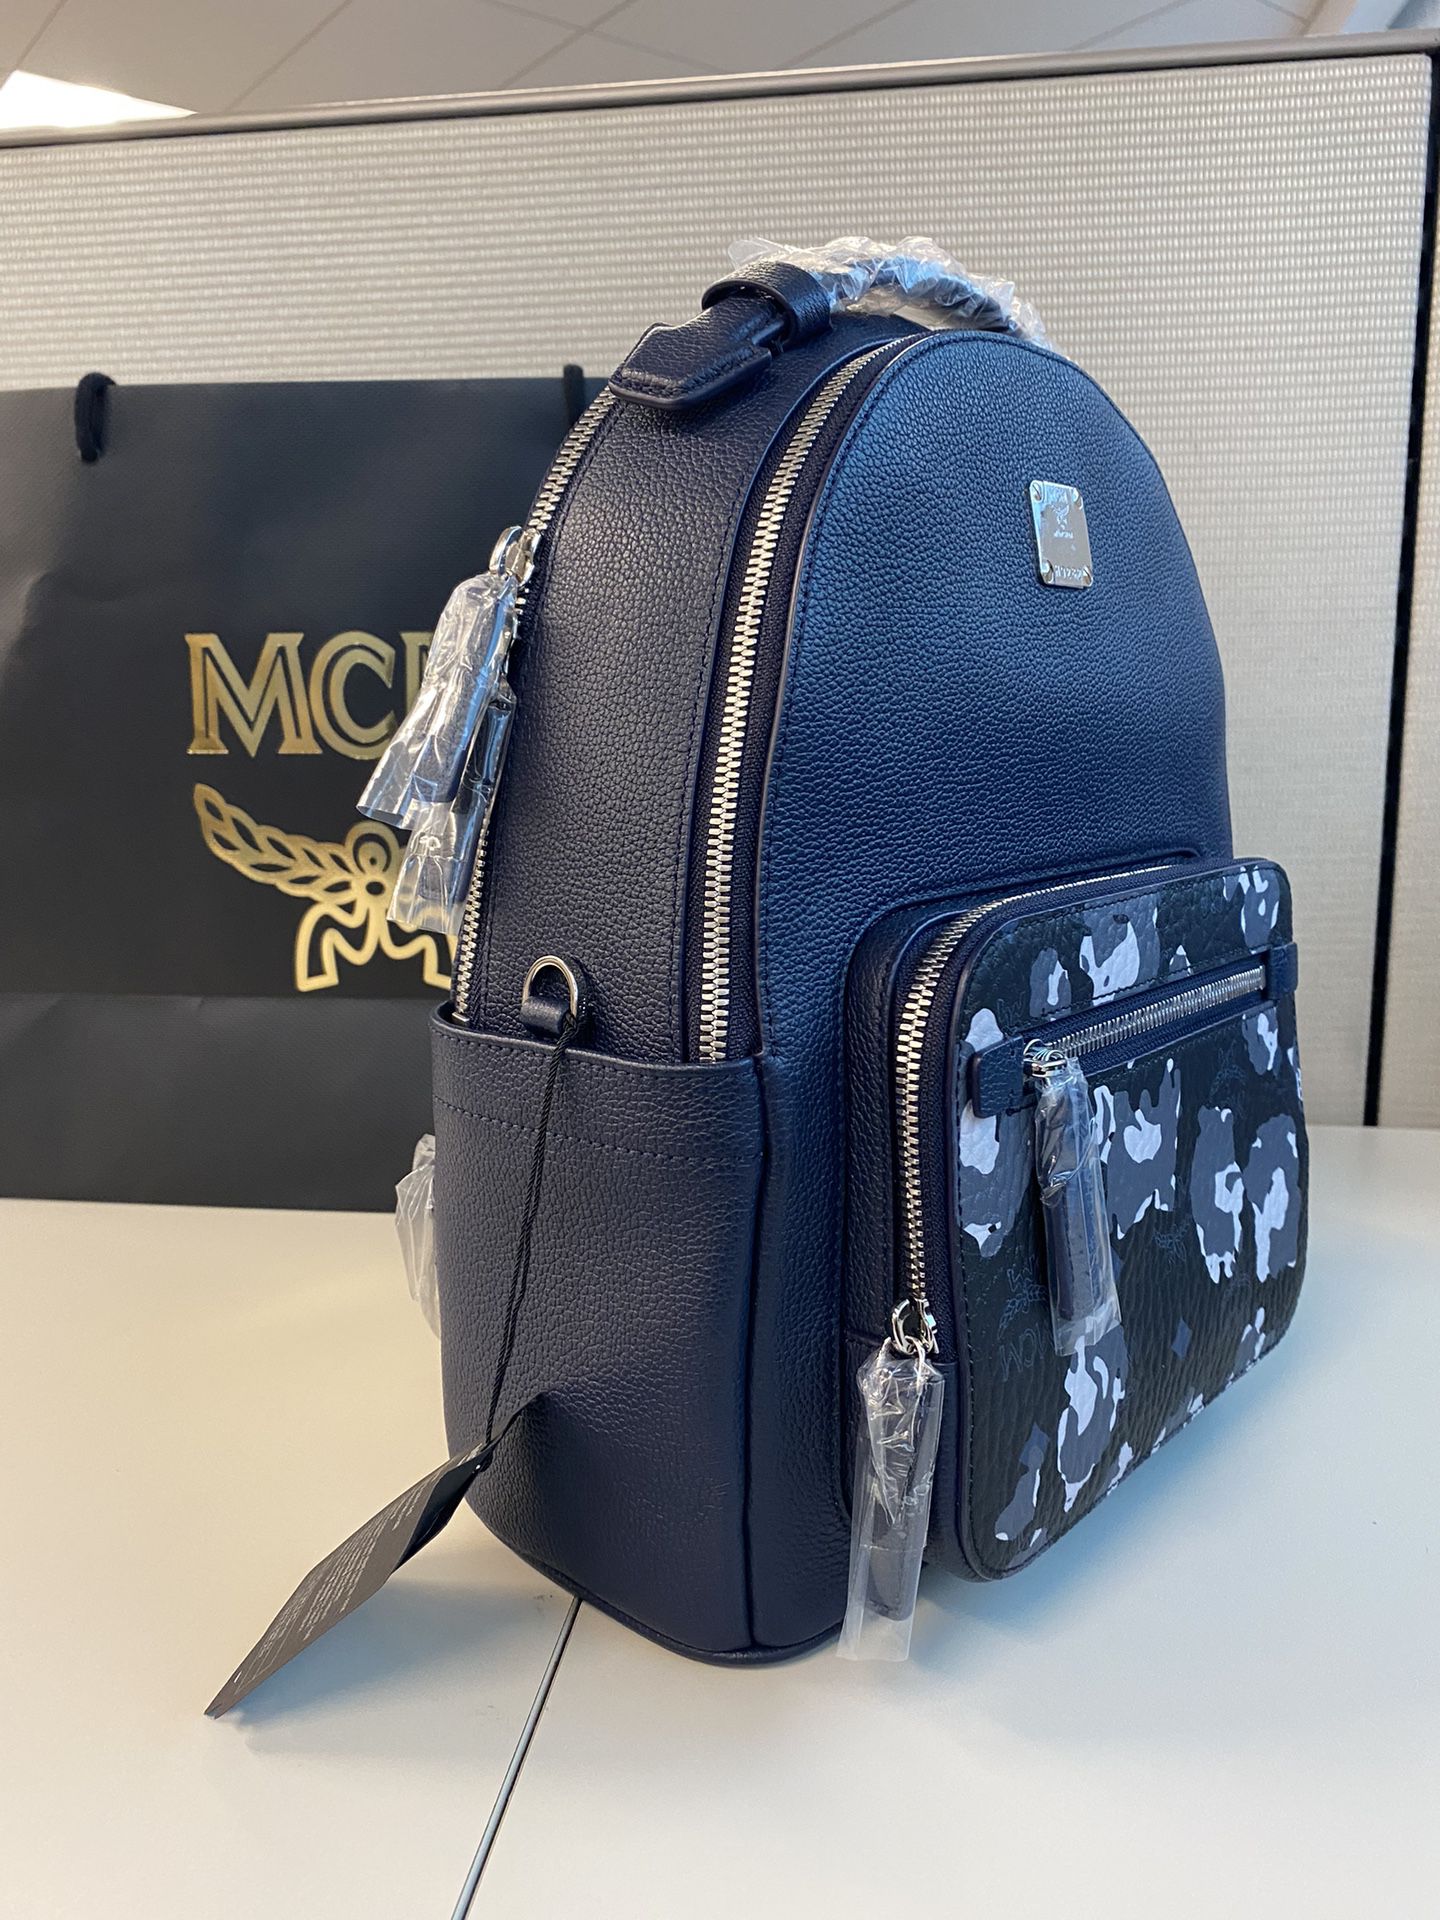 Mcm Backpack for Sale in Lehigh Acres, FL - OfferUp